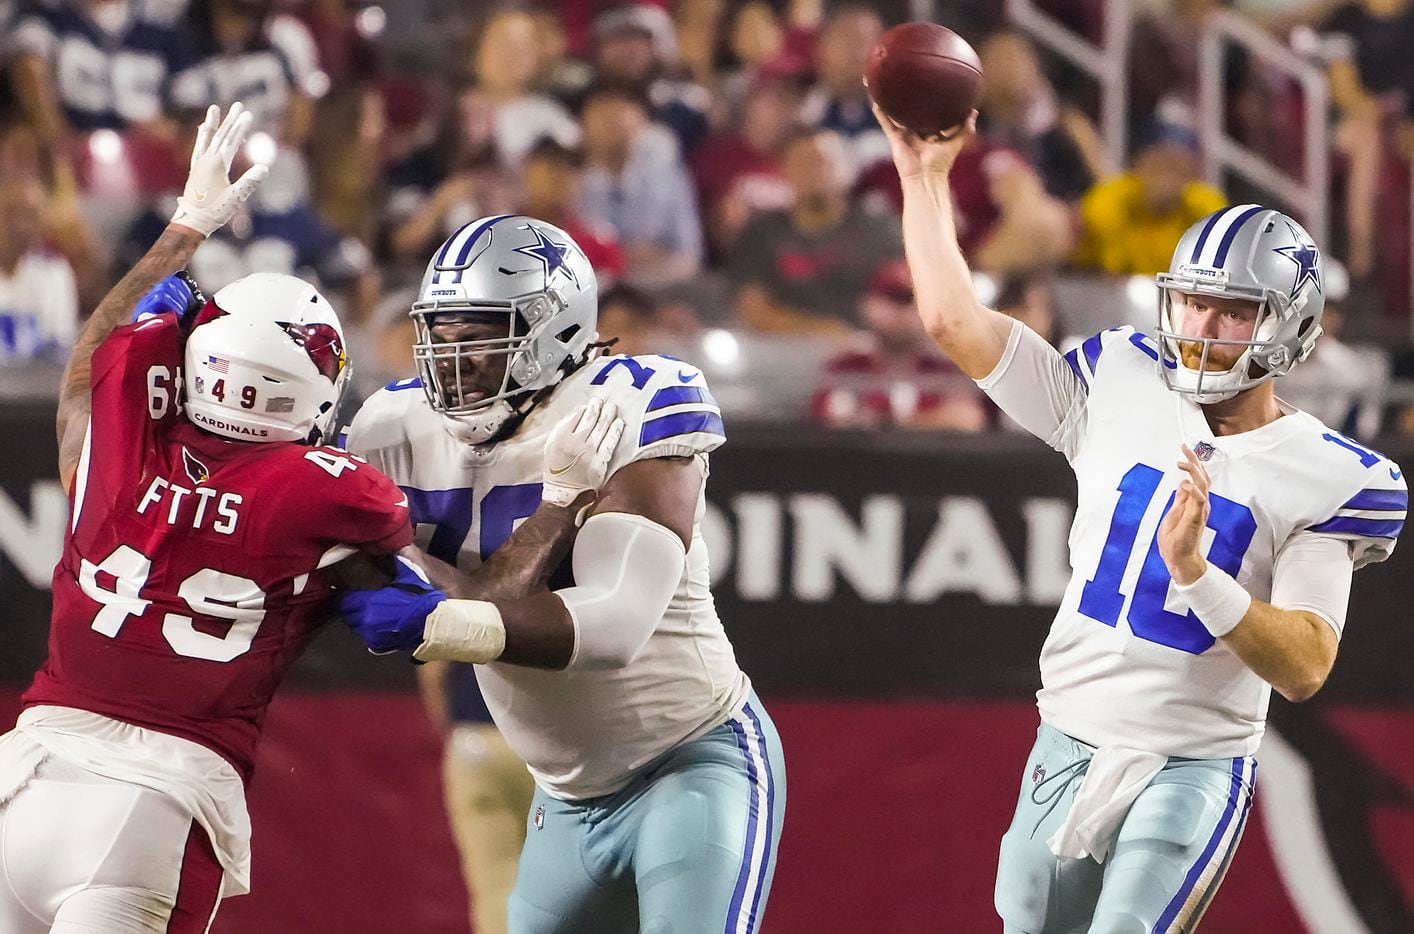 Dallas Cowboys quarterback Cooper Rush (10) throws a pass as tackle Josh Ball (76) blocks against Arizona Cardinals linebacker Kylie Fitts (49) during the second quarter of an NFL football game at State Farm Stadium on Friday, Aug. 13, 2021, in Glendale, Ariz.